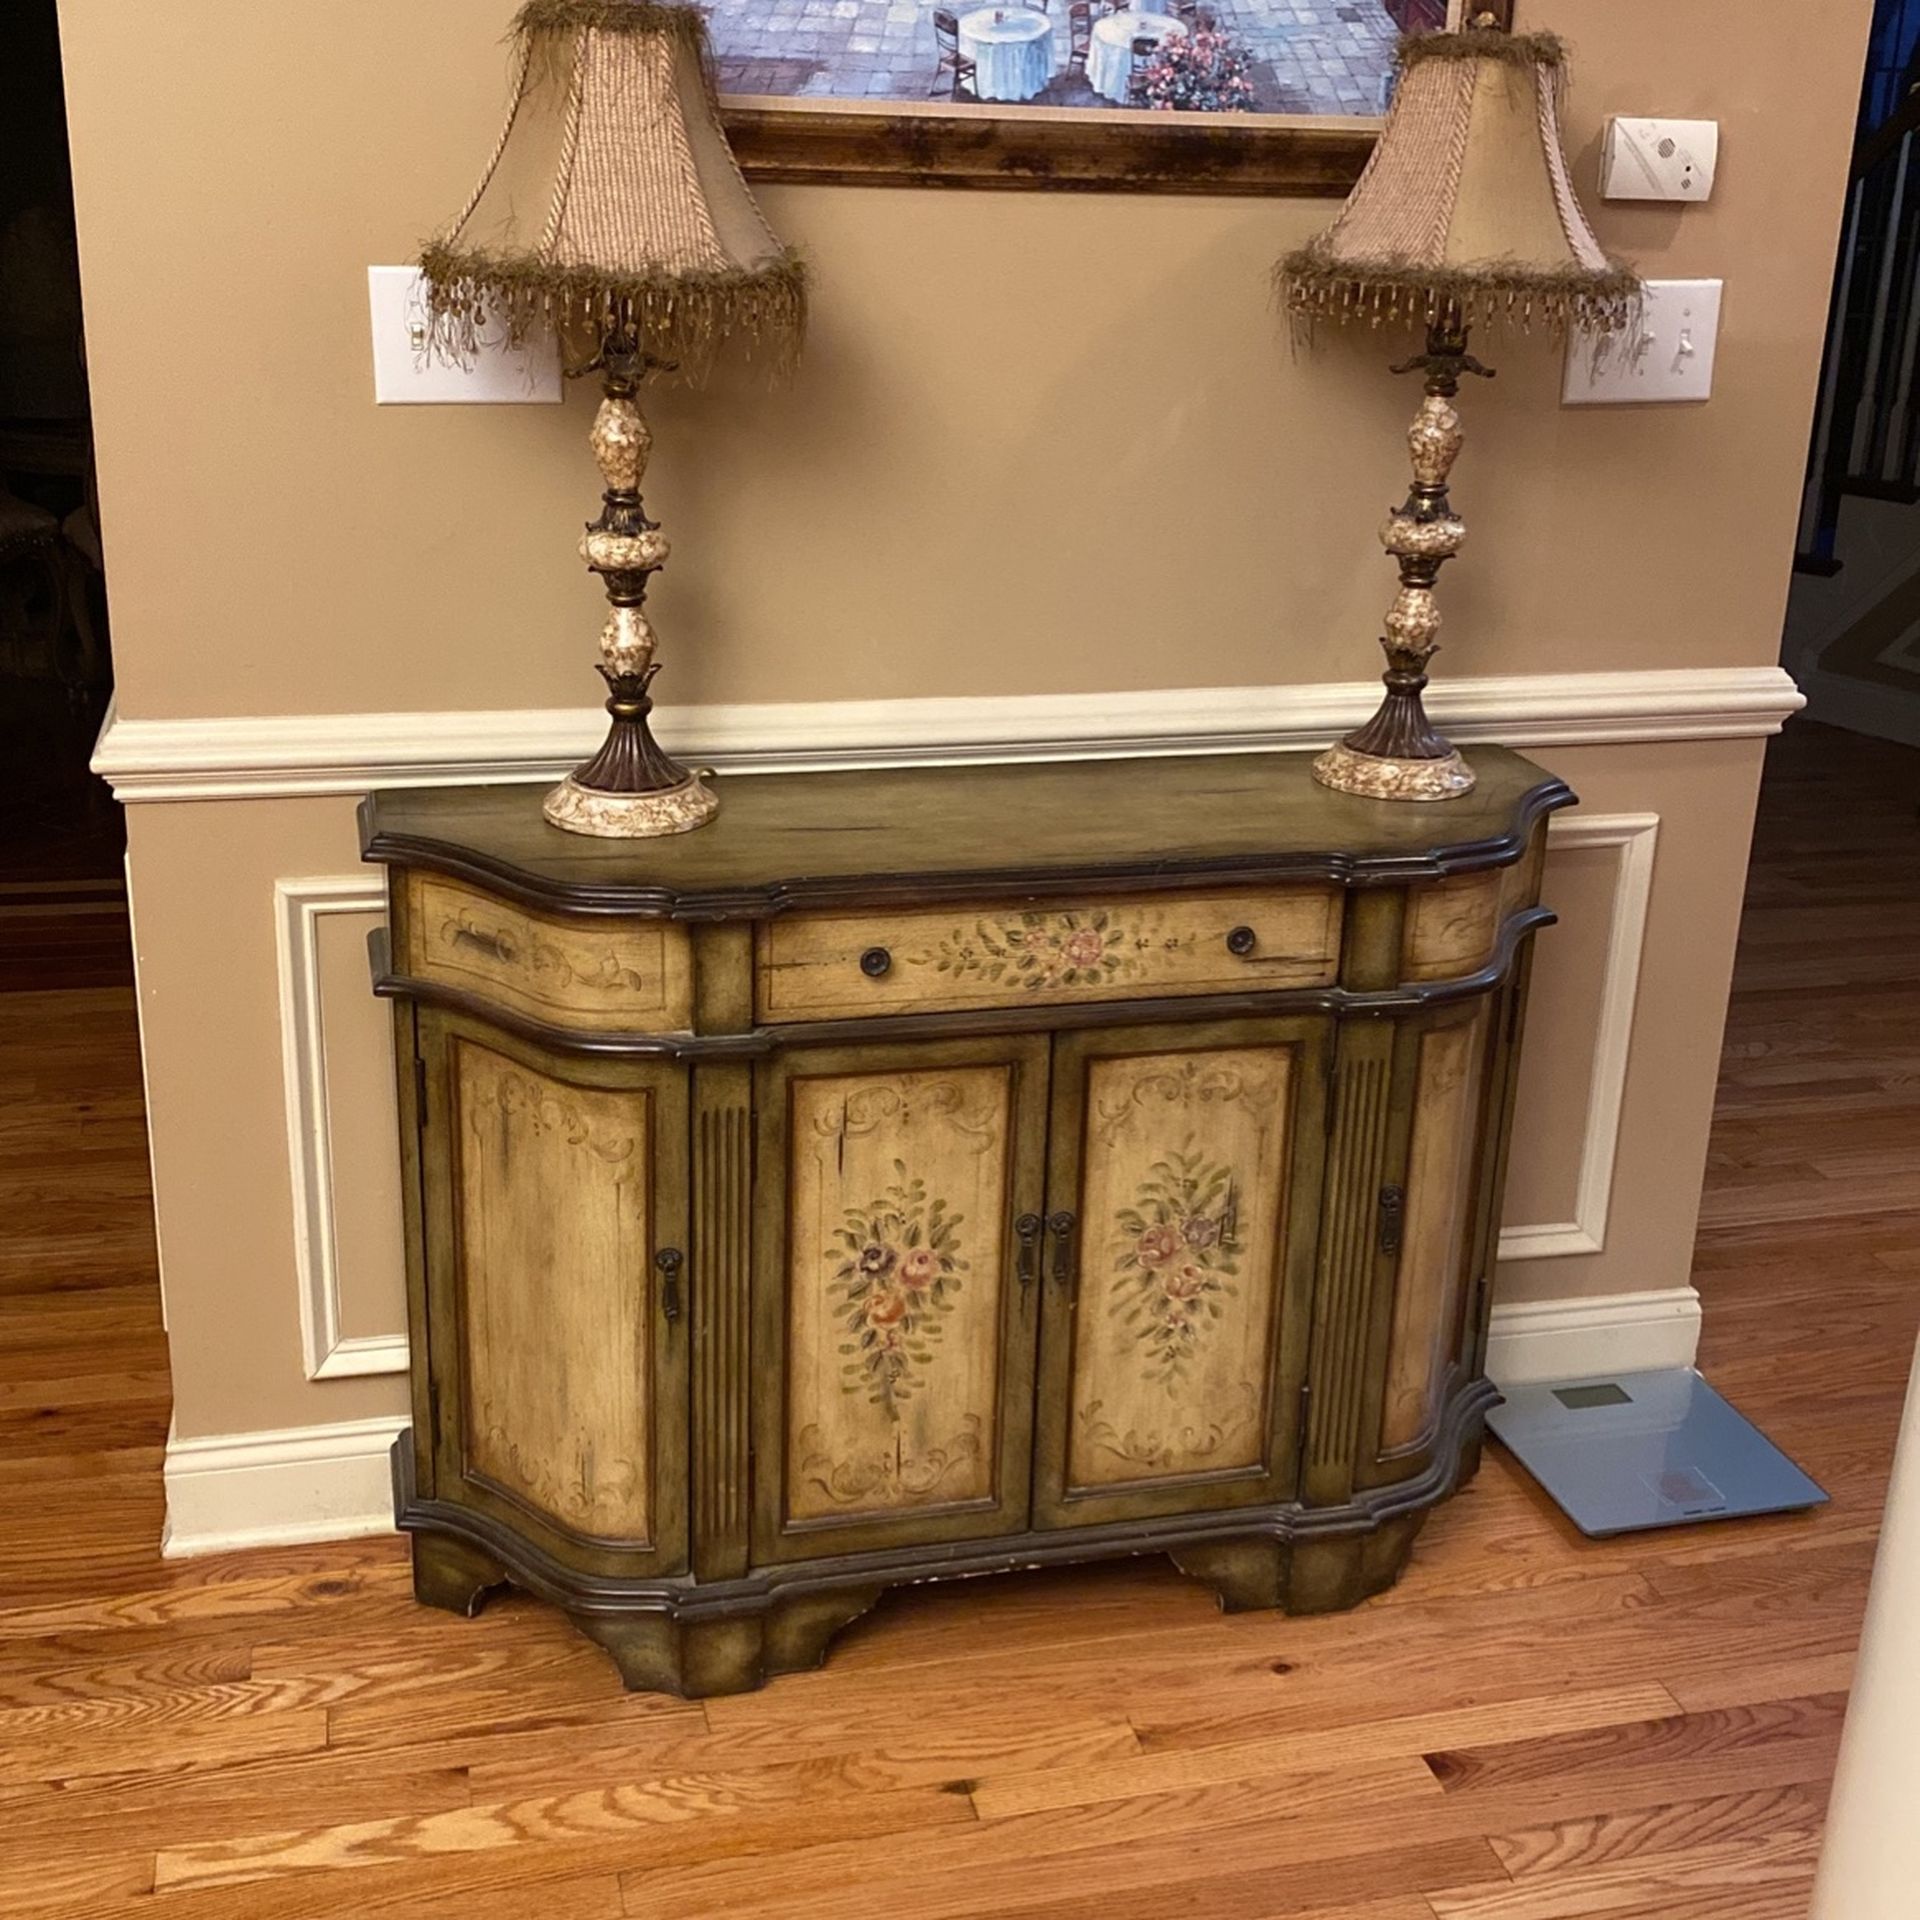 Hand Painted Console Table With Two Nice Lamps Expensive When Purchased